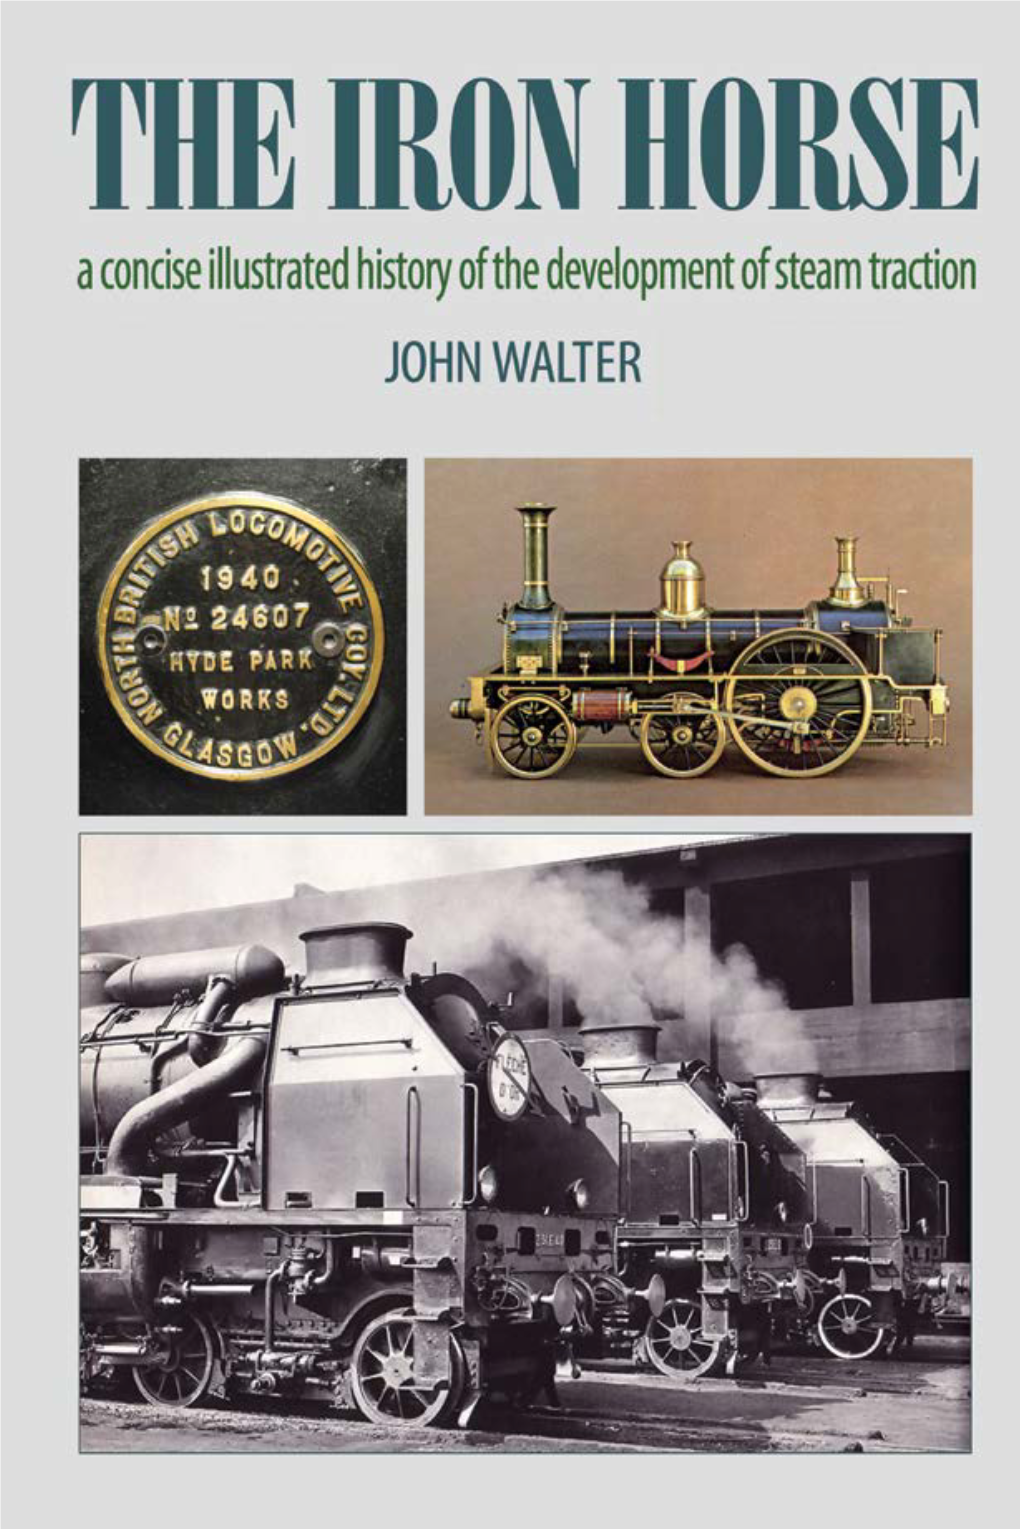 The Iron Horse a Concise Illustrated History of the Development of Steam Traction